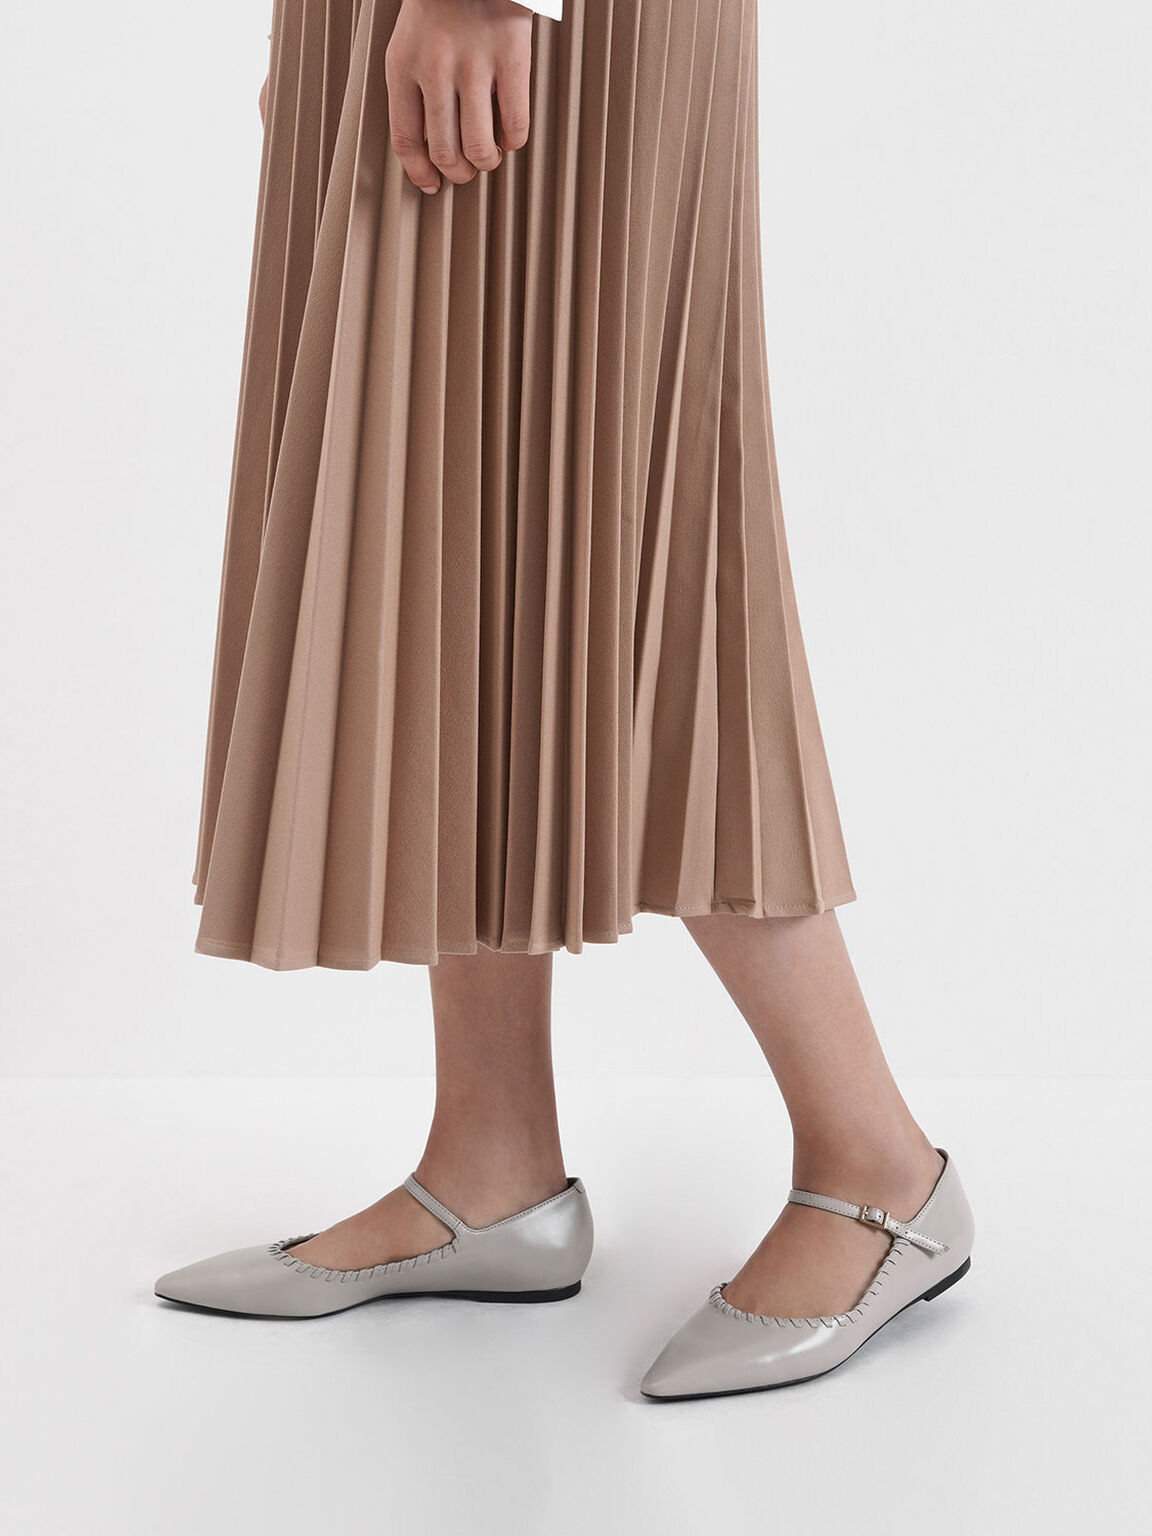 Whipstitch Trim Mary Jane Flats, Nude, hi-res